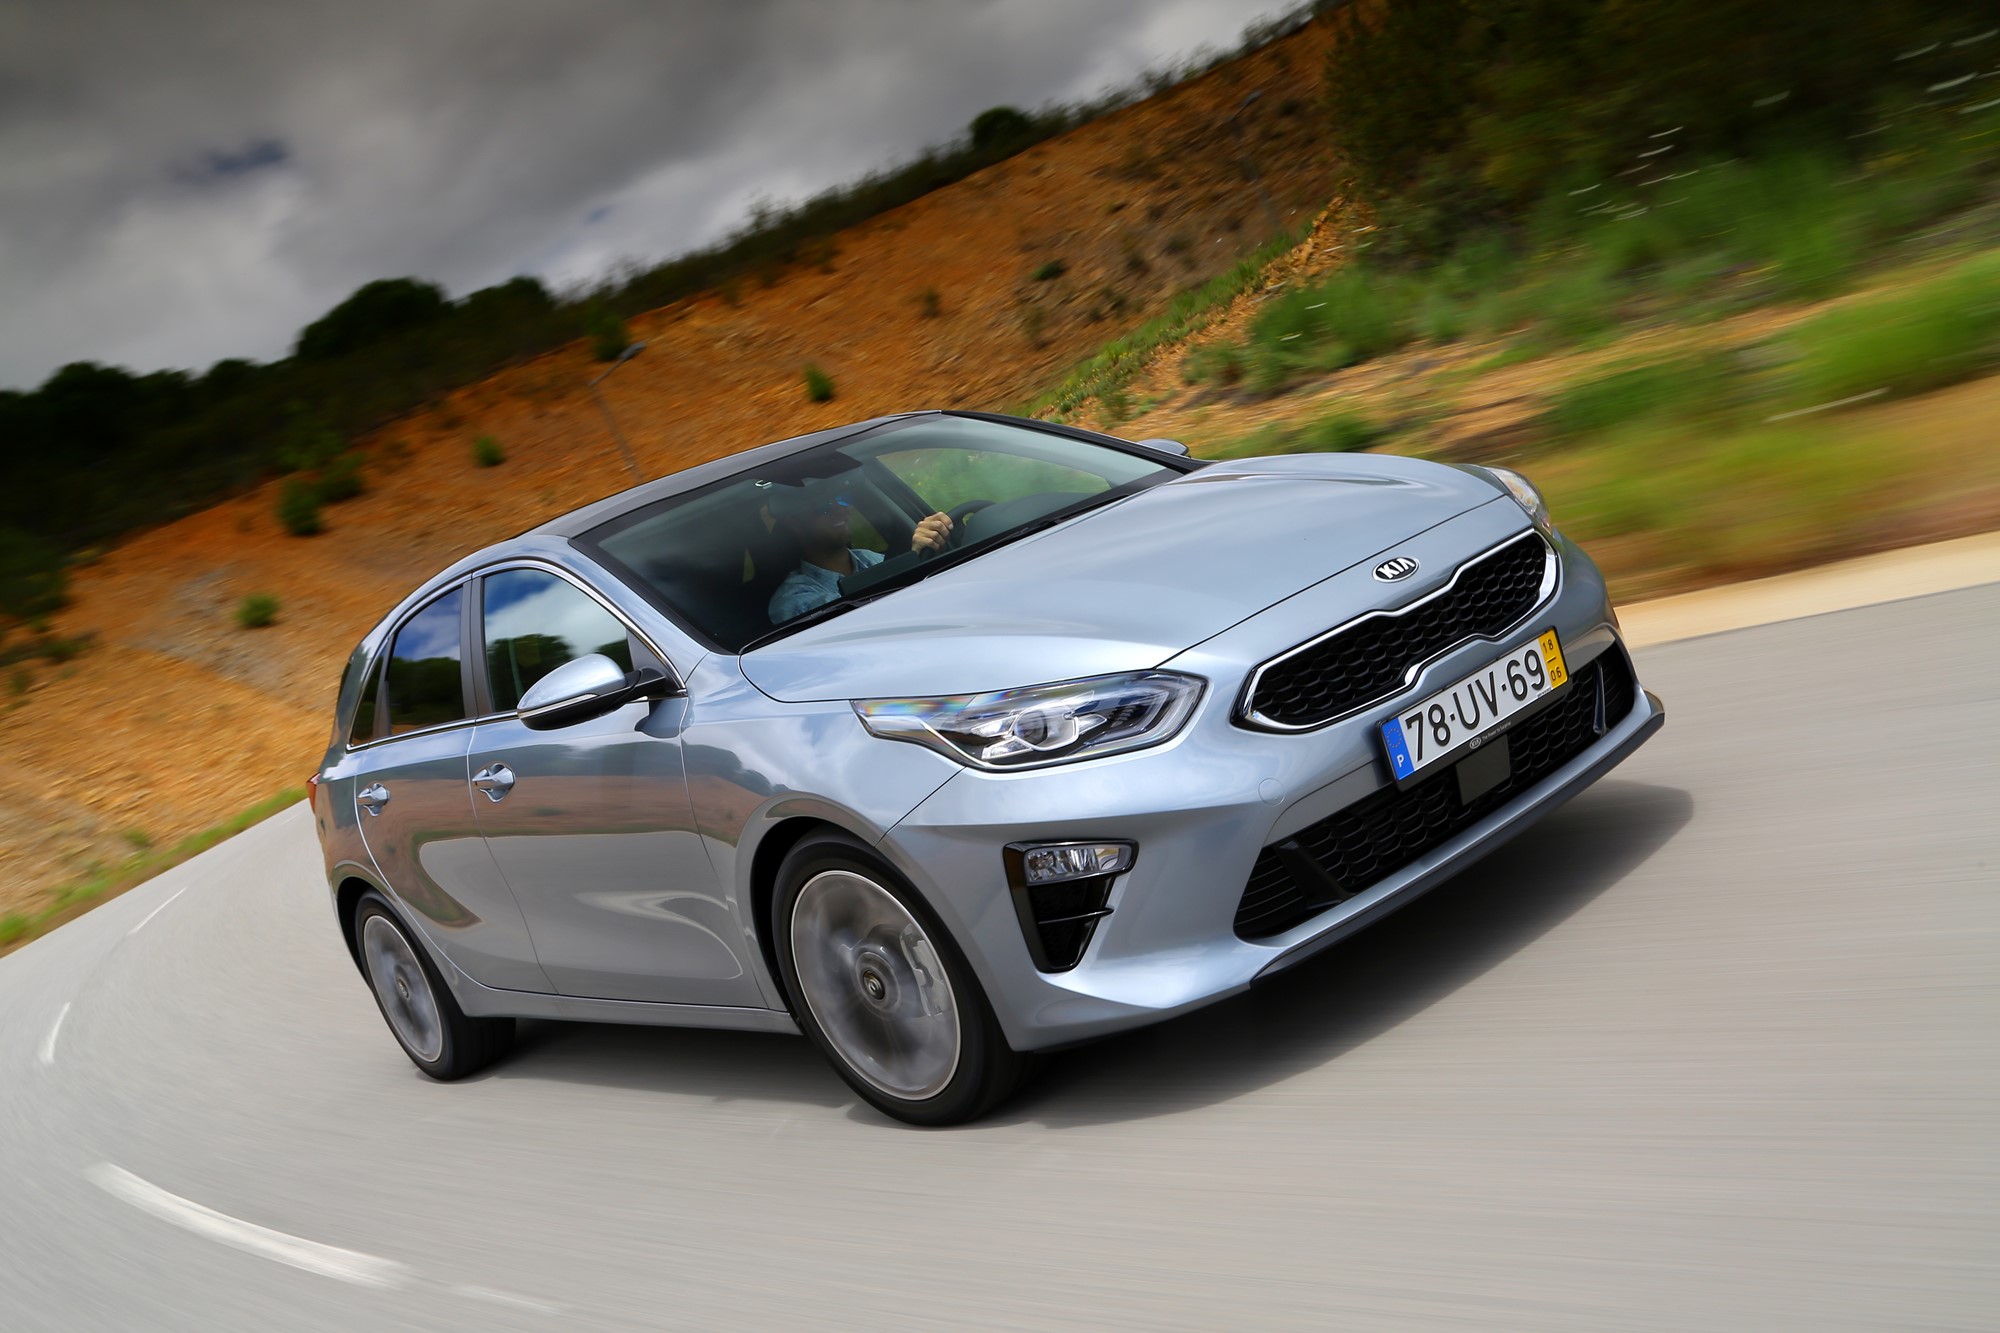 New Kia Ceed prices and specification revealed (gallery)